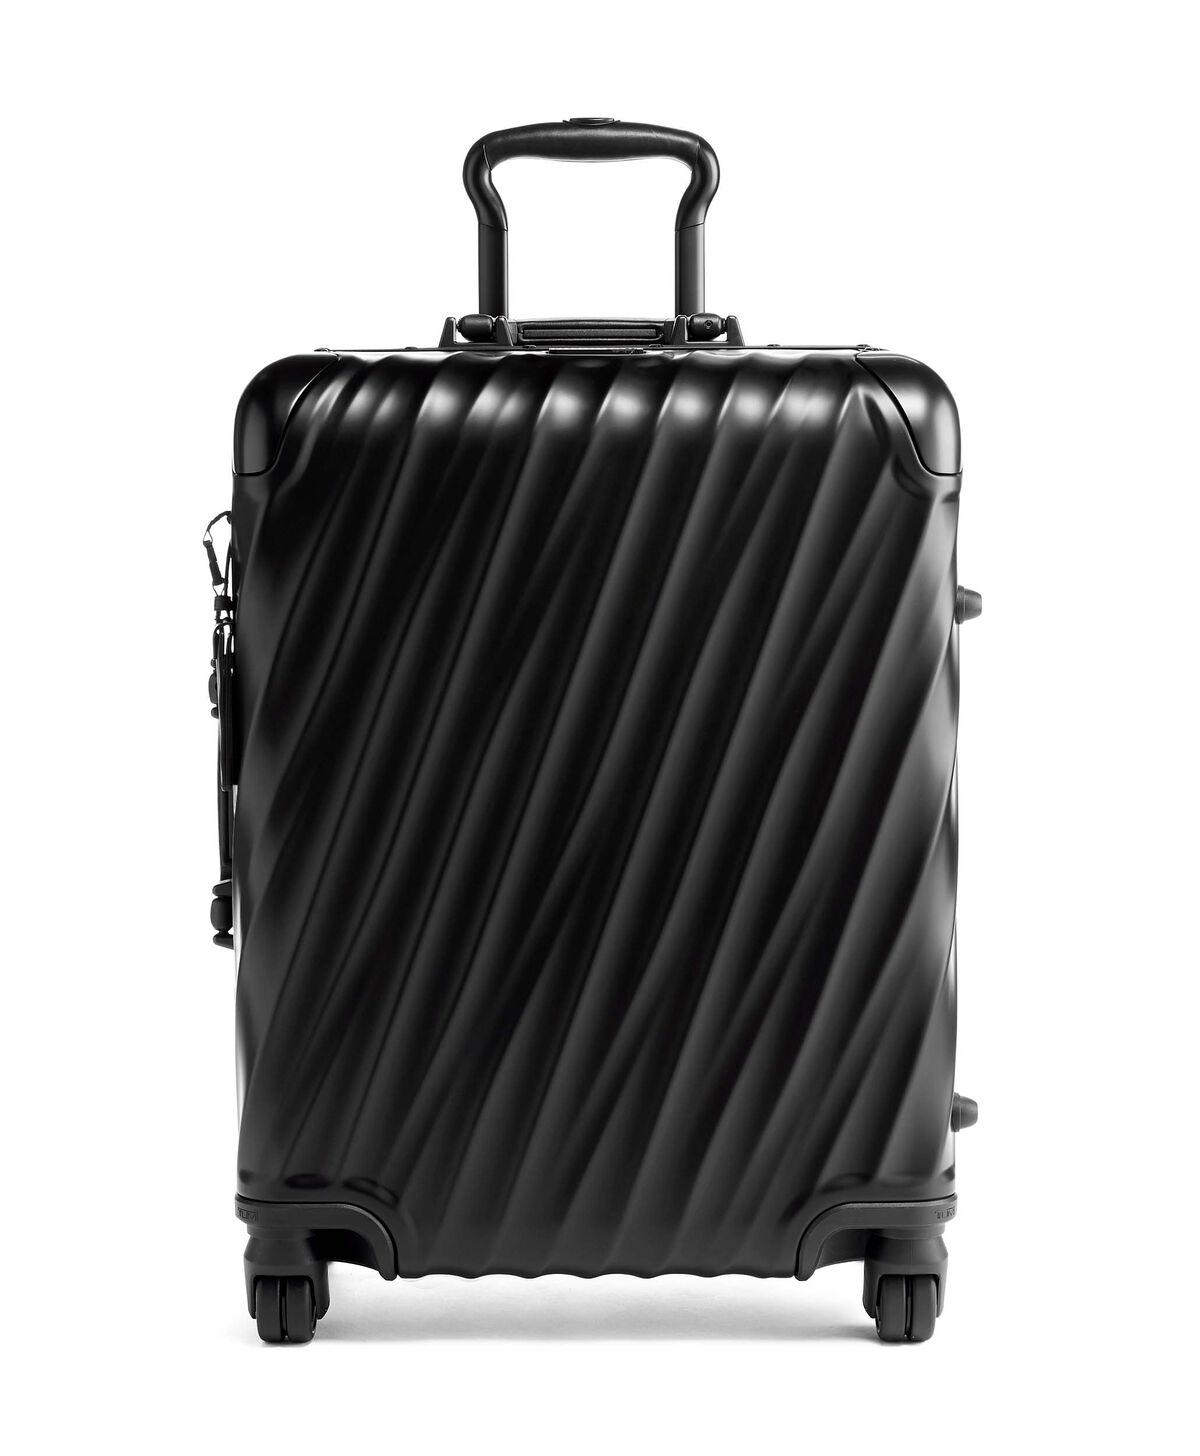 Tumi Continental Carry-On